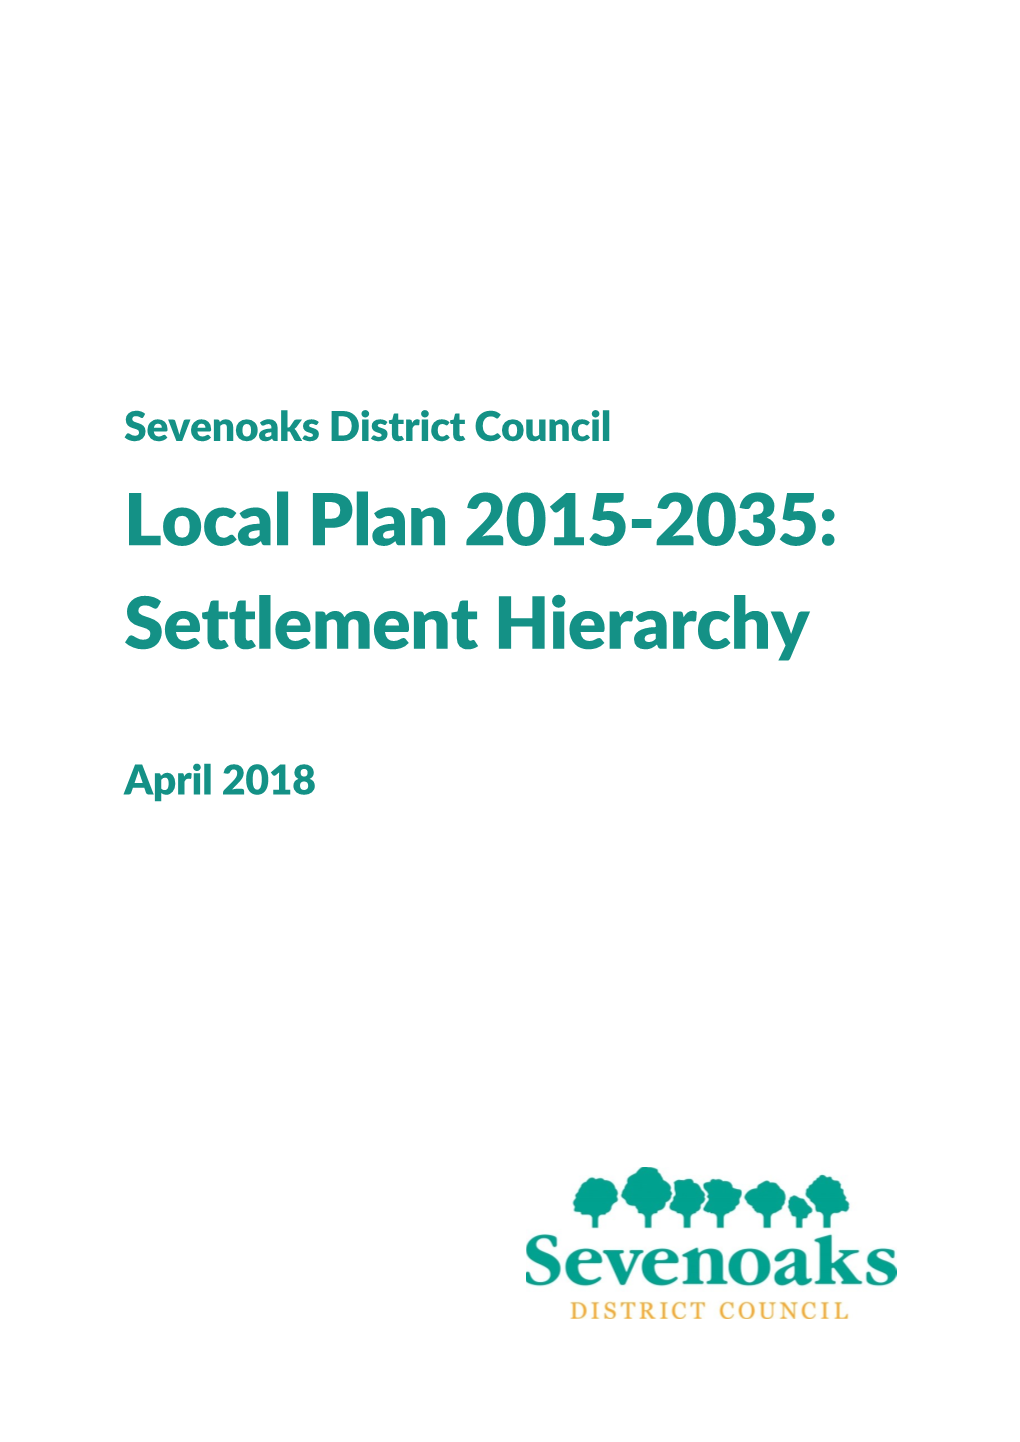 Local Plan 2015-2035: Settlement Hierarchy